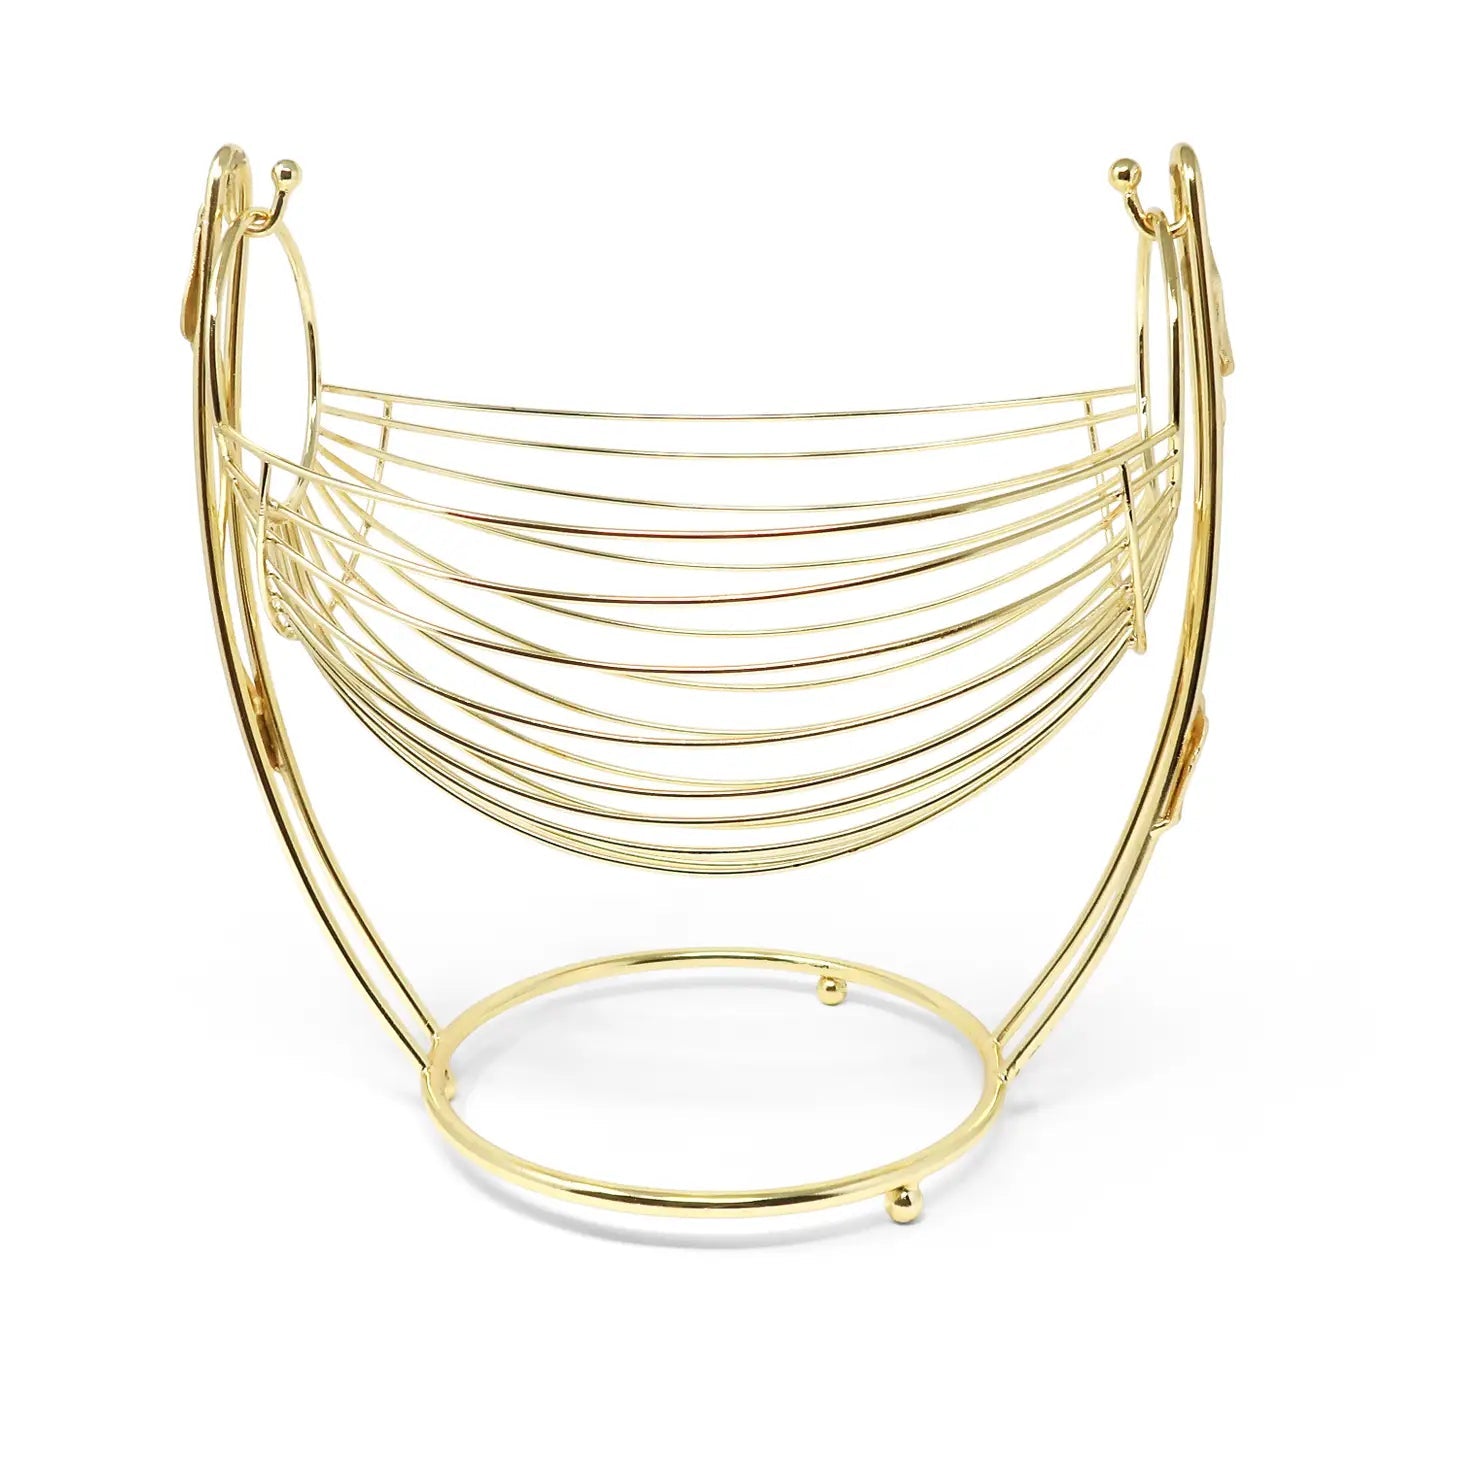 Gold Wire Decorative Basket Vases High Class Touch - Home Decor 